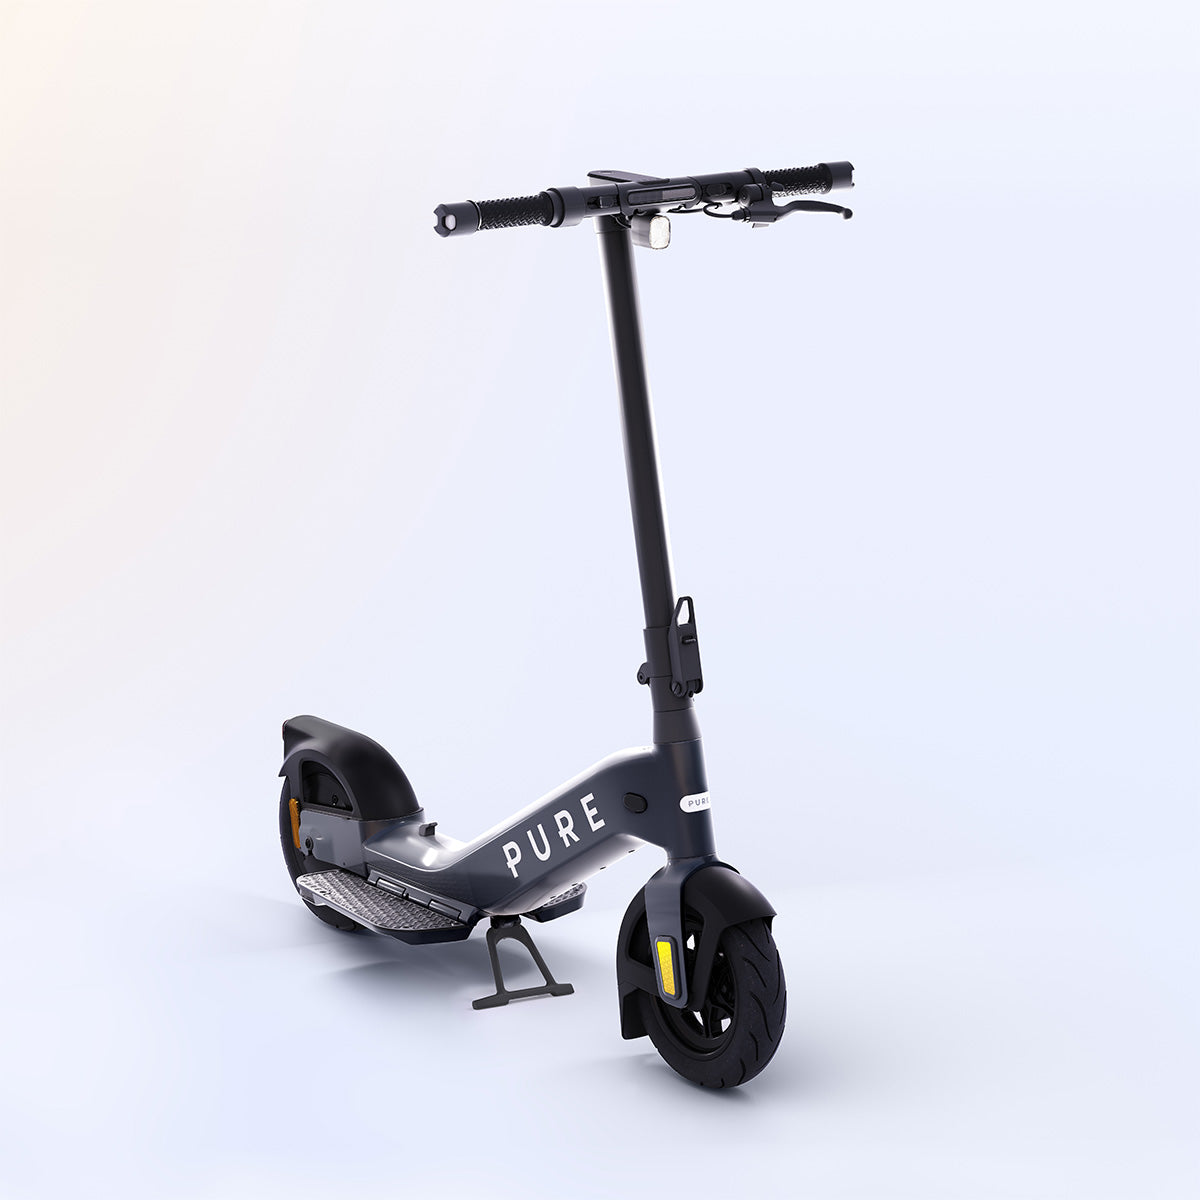 Pure Advance+ Electric Scooter - The ultimate riding position More stability. 70% more slimline. 50km range.